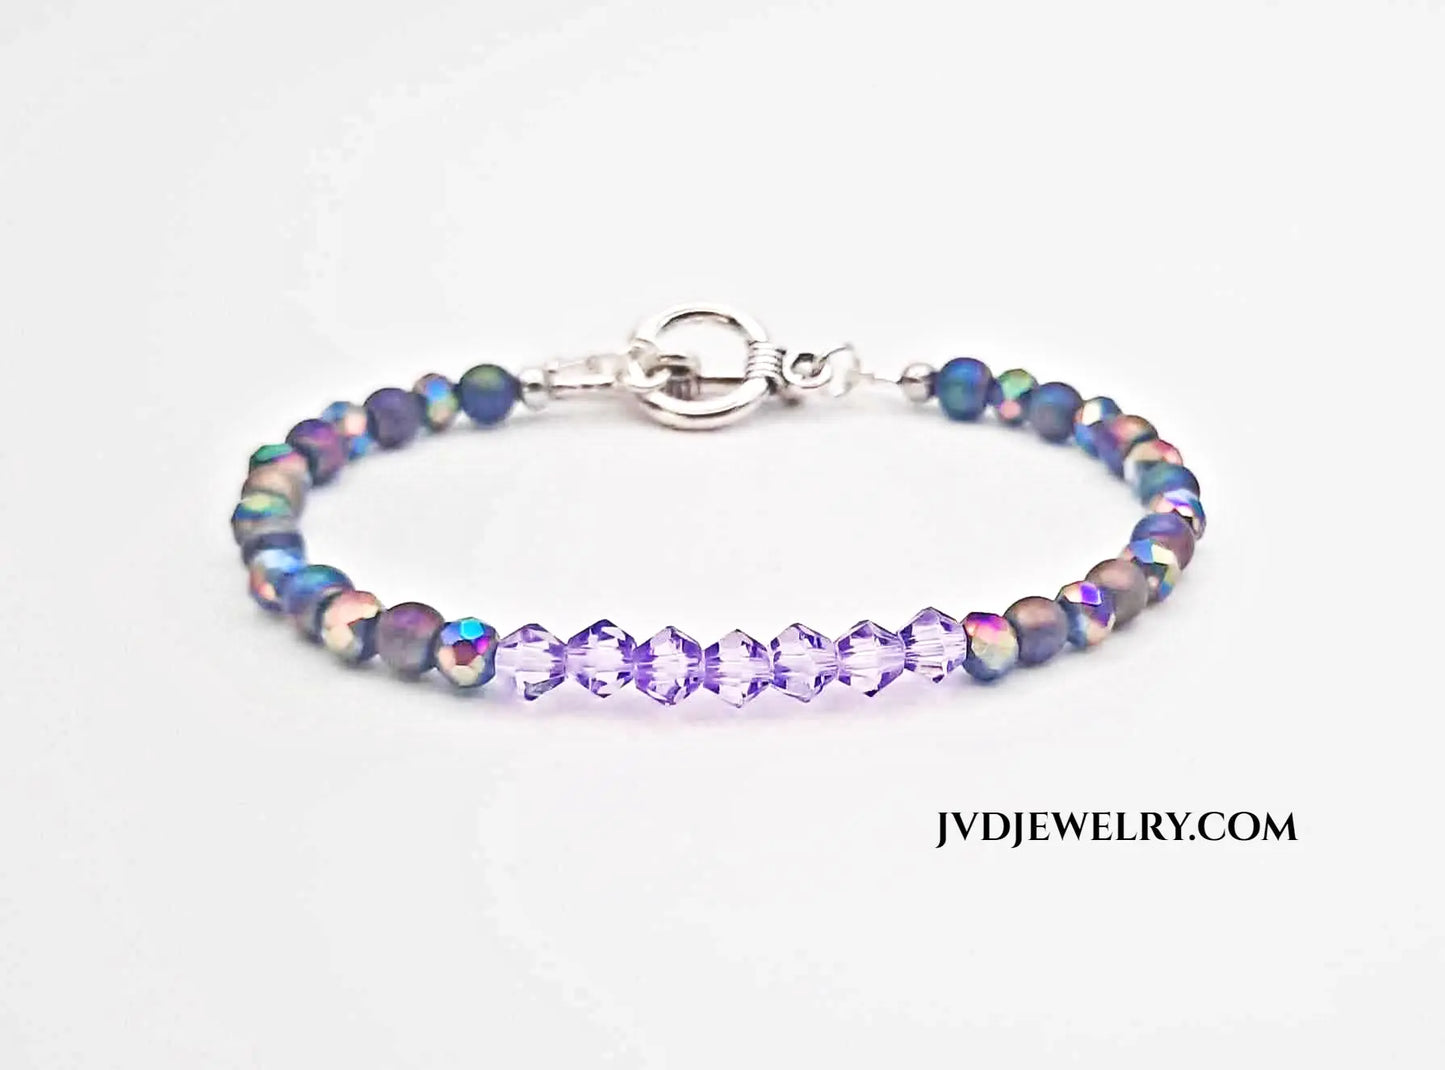 Rainbow bracelet with lavender crystals - Image #1